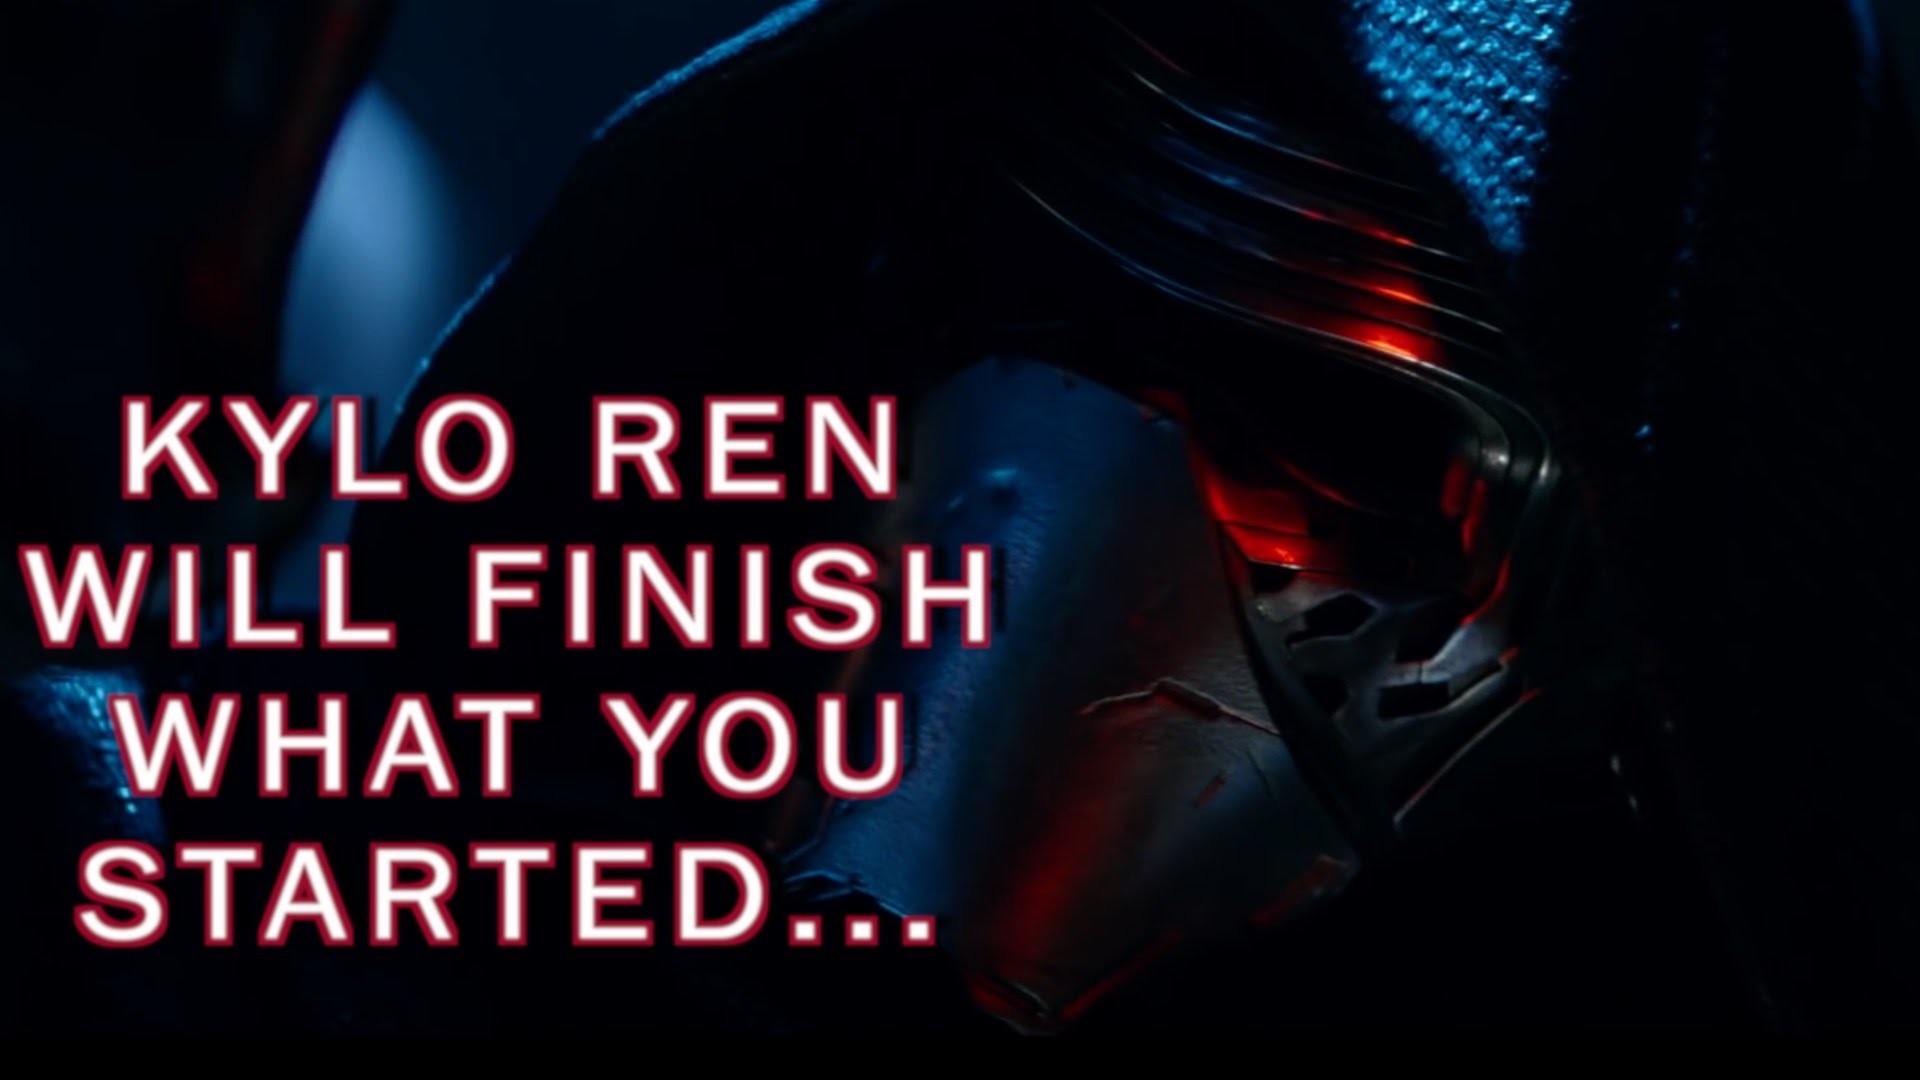 1920x1080 Kylo Ren Will Finish What You Started. . . - Star Wars Ep. 7